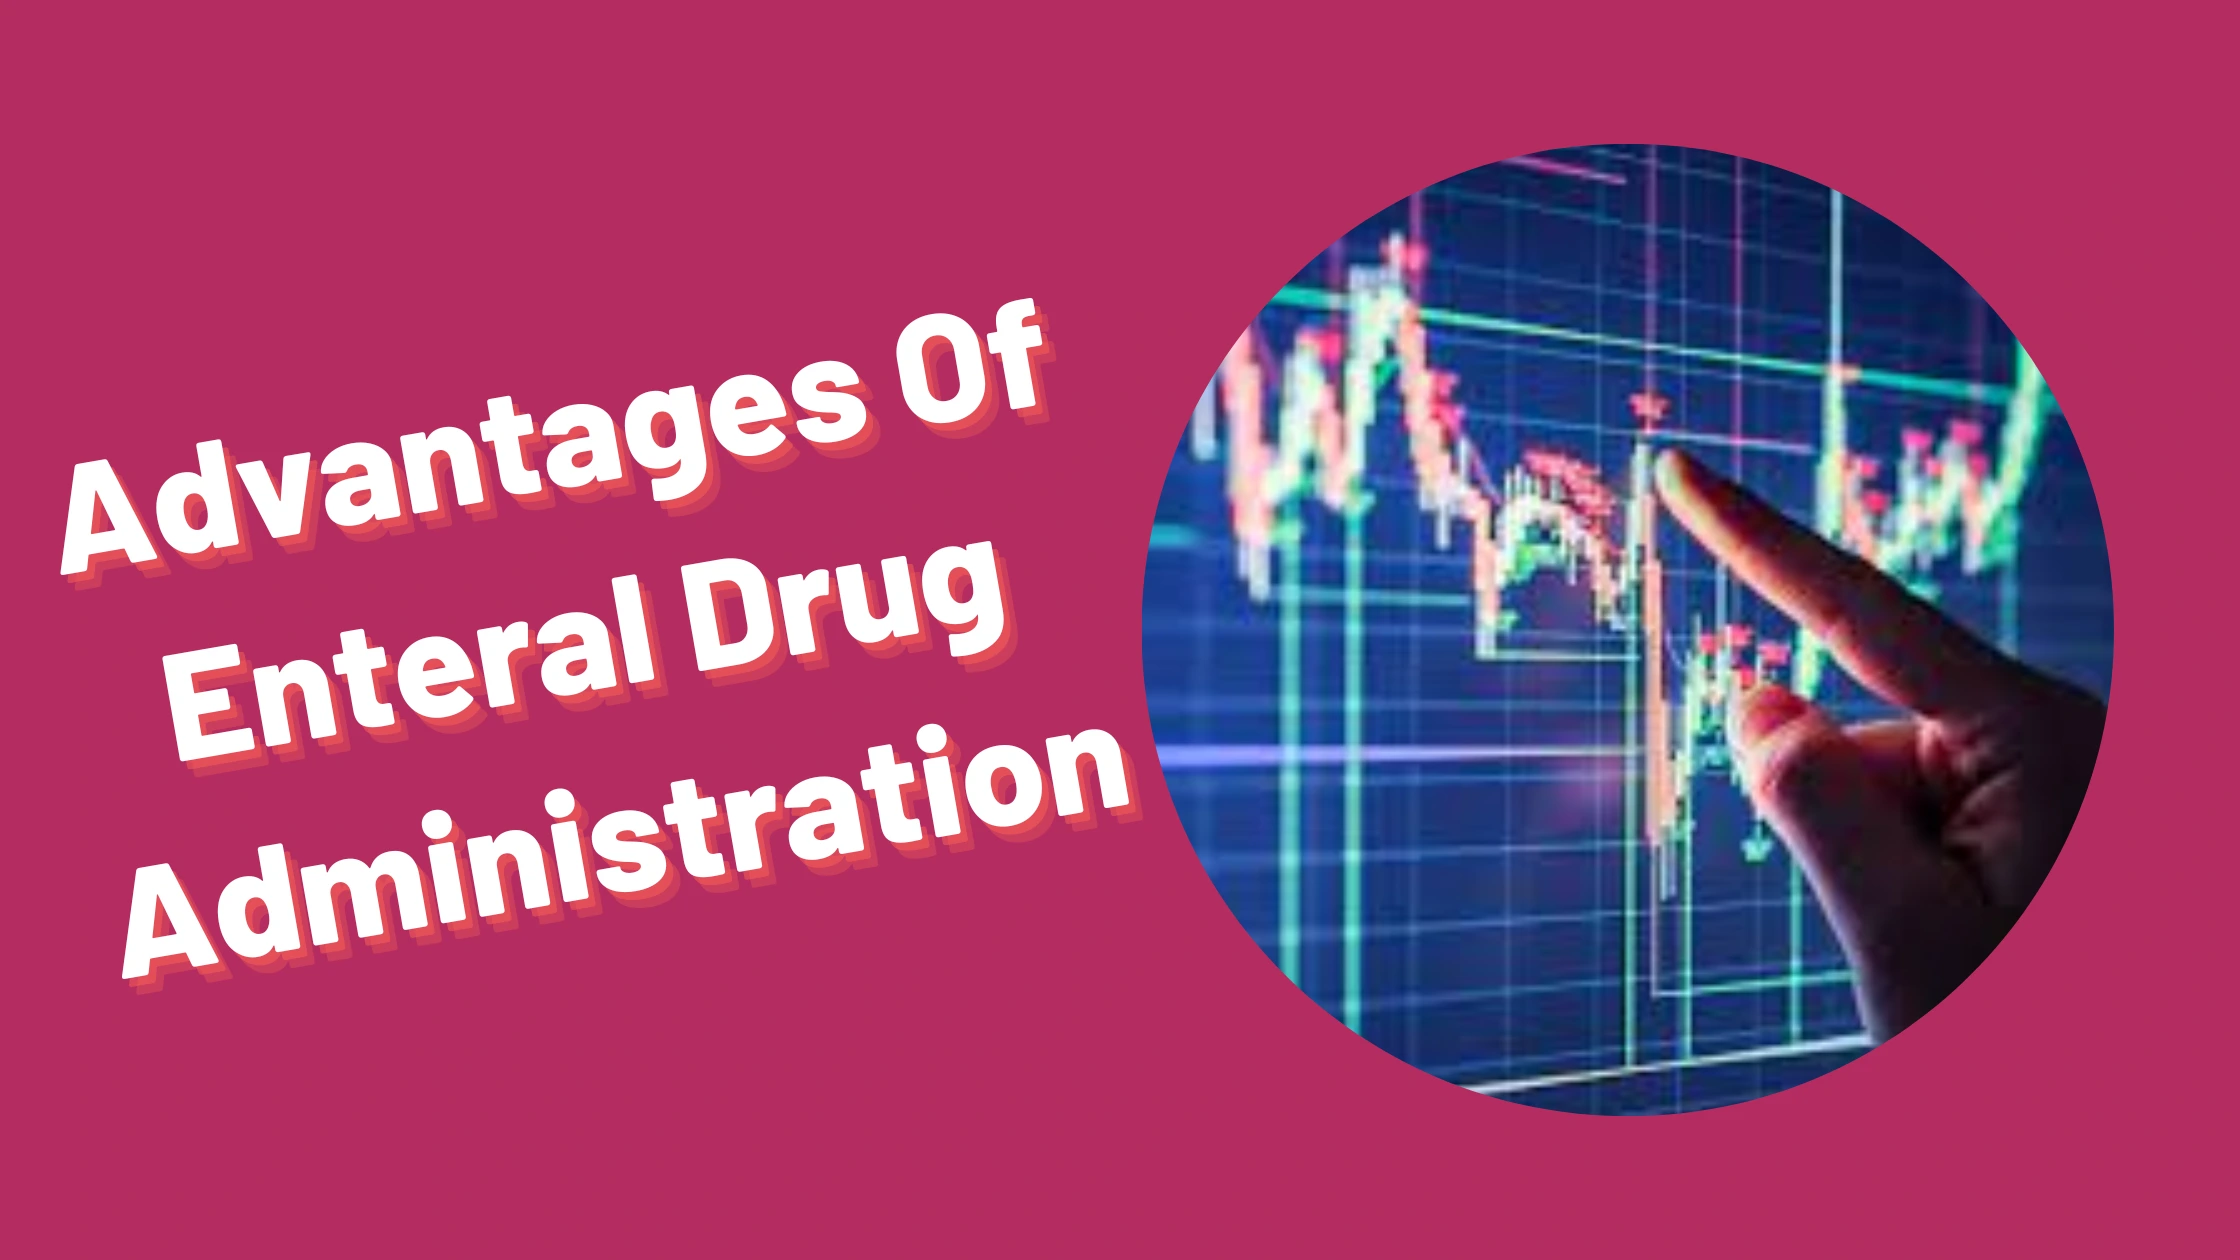 You are currently viewing [Very Cool] Mnemonic : Advantages Of Enteral Drug Administration